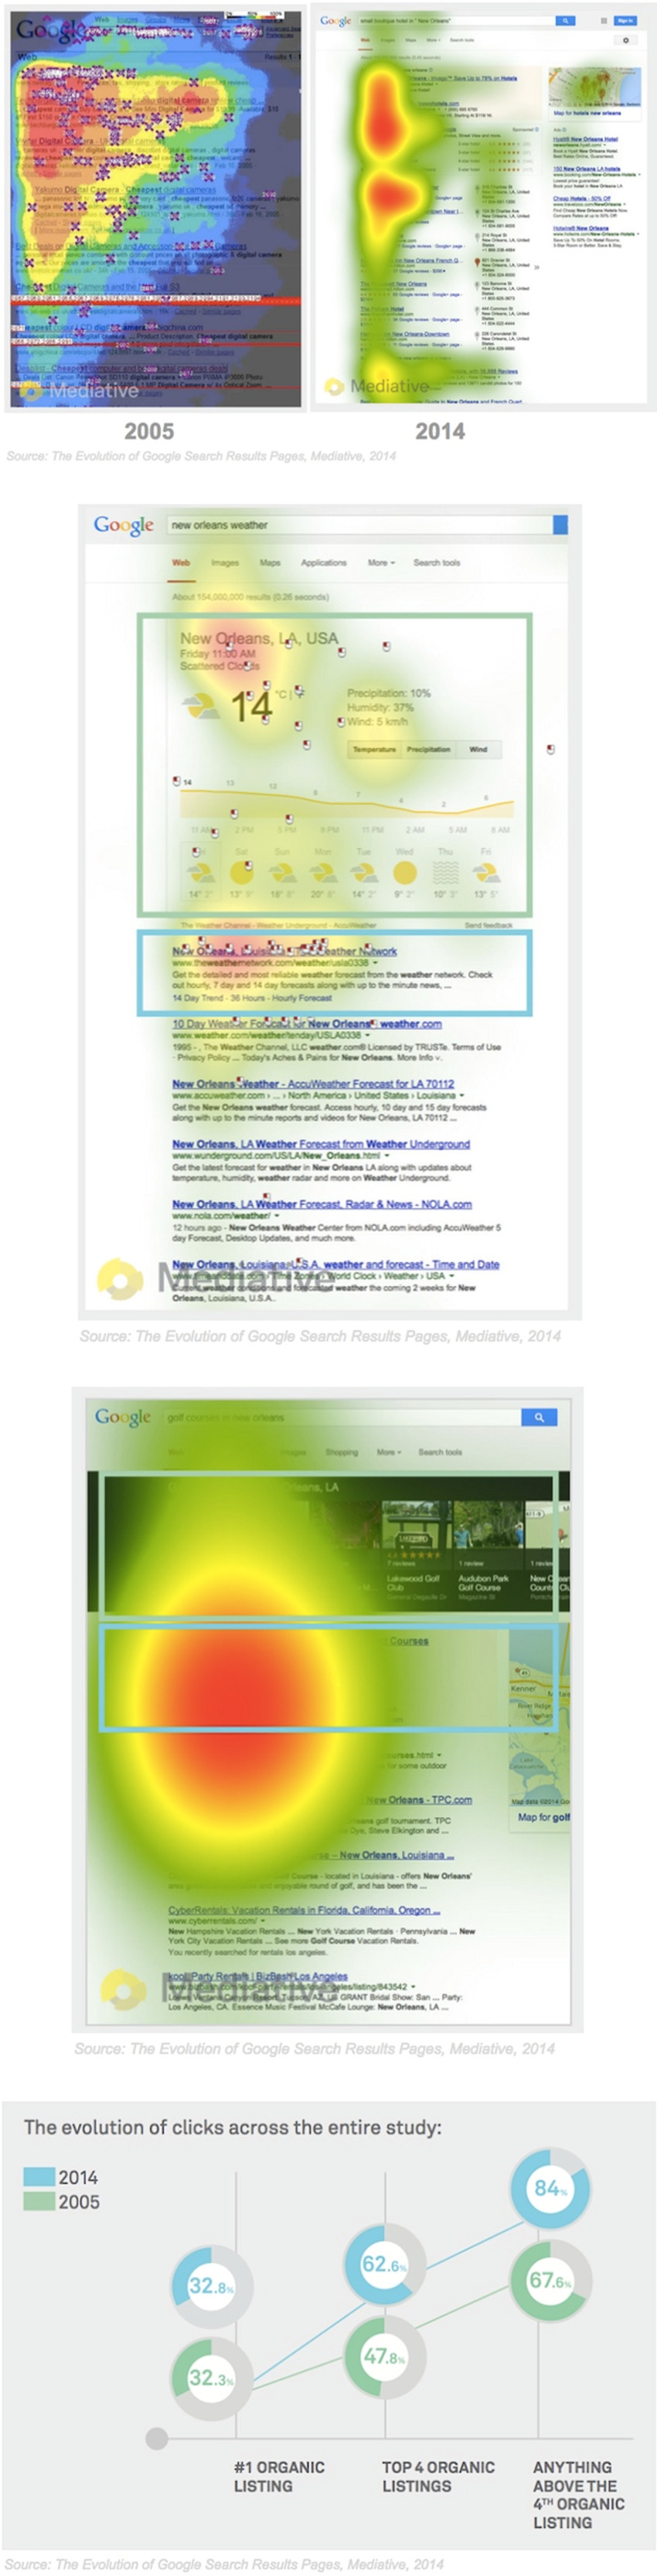 Eye-Tracking Study: How Users View Google Search Result Pages - Profs | The MarTech Digest | Scoop.it